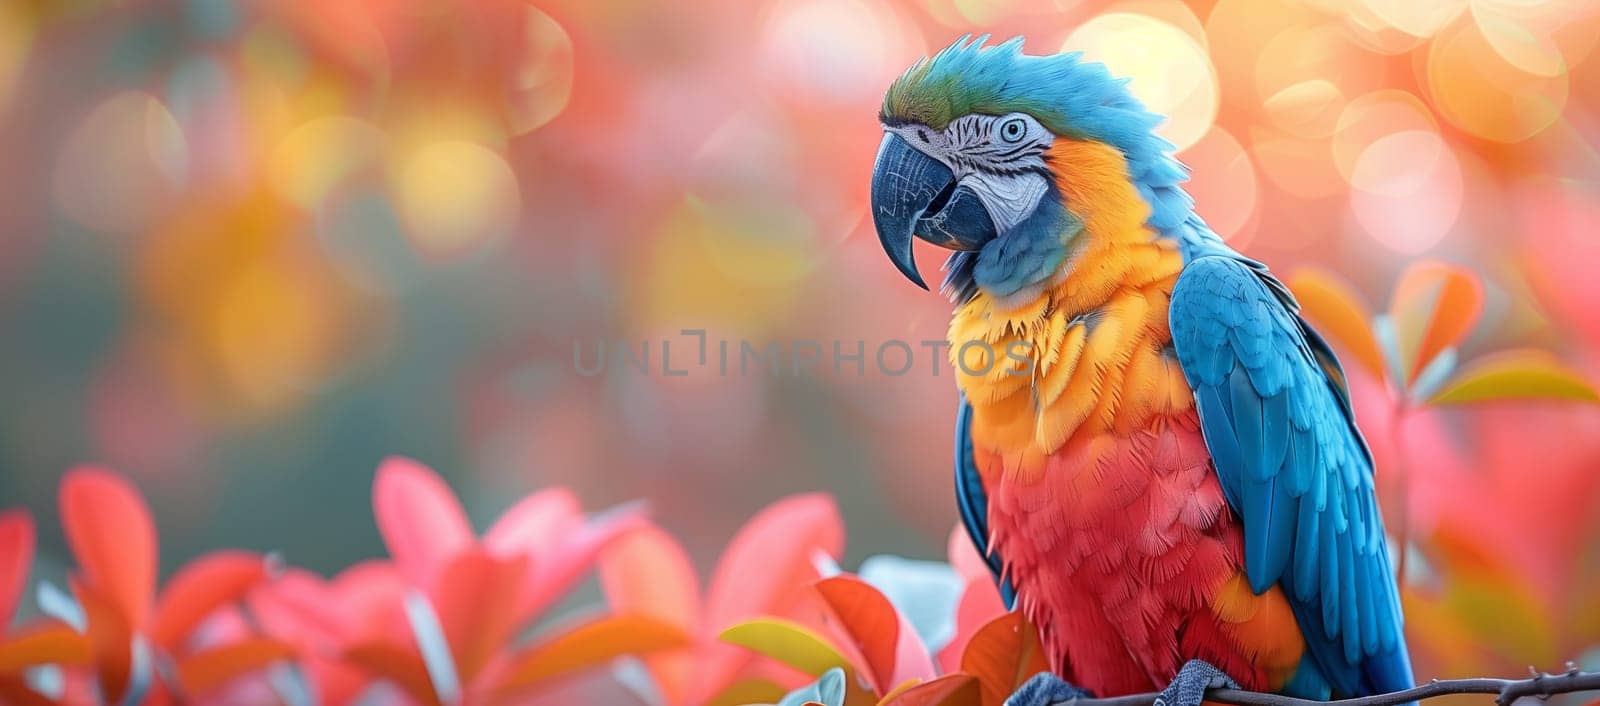 Colorful Macaw perched on branch, surrounded by flowers by richwolf